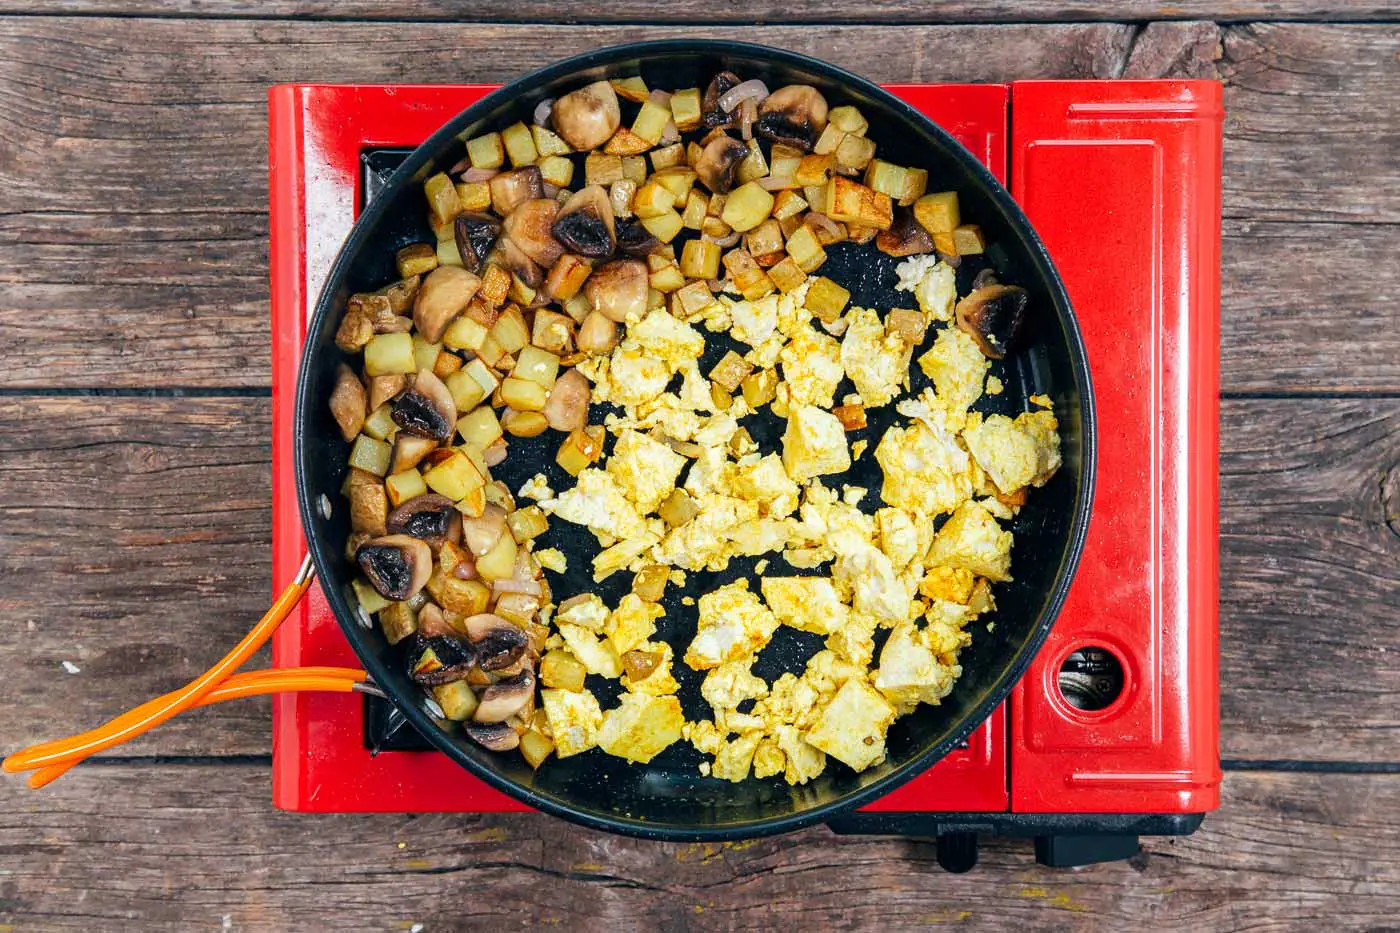 Cooking cubed potatoes and crumbled tofu in a large skillet for a scramble.